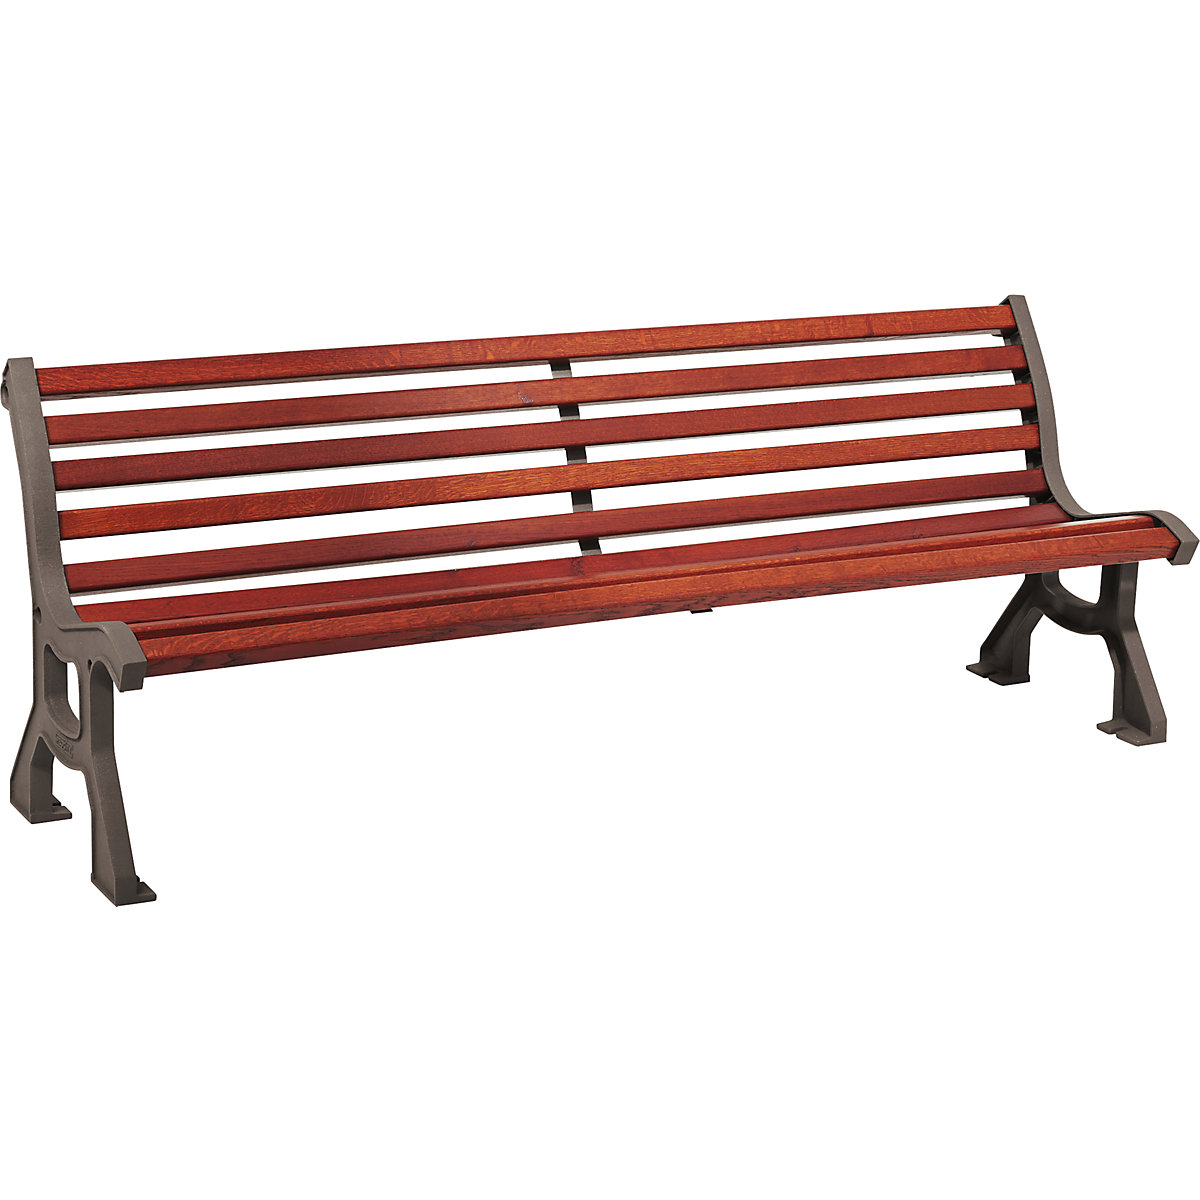 LUBLIN wooden bench – PROCITY